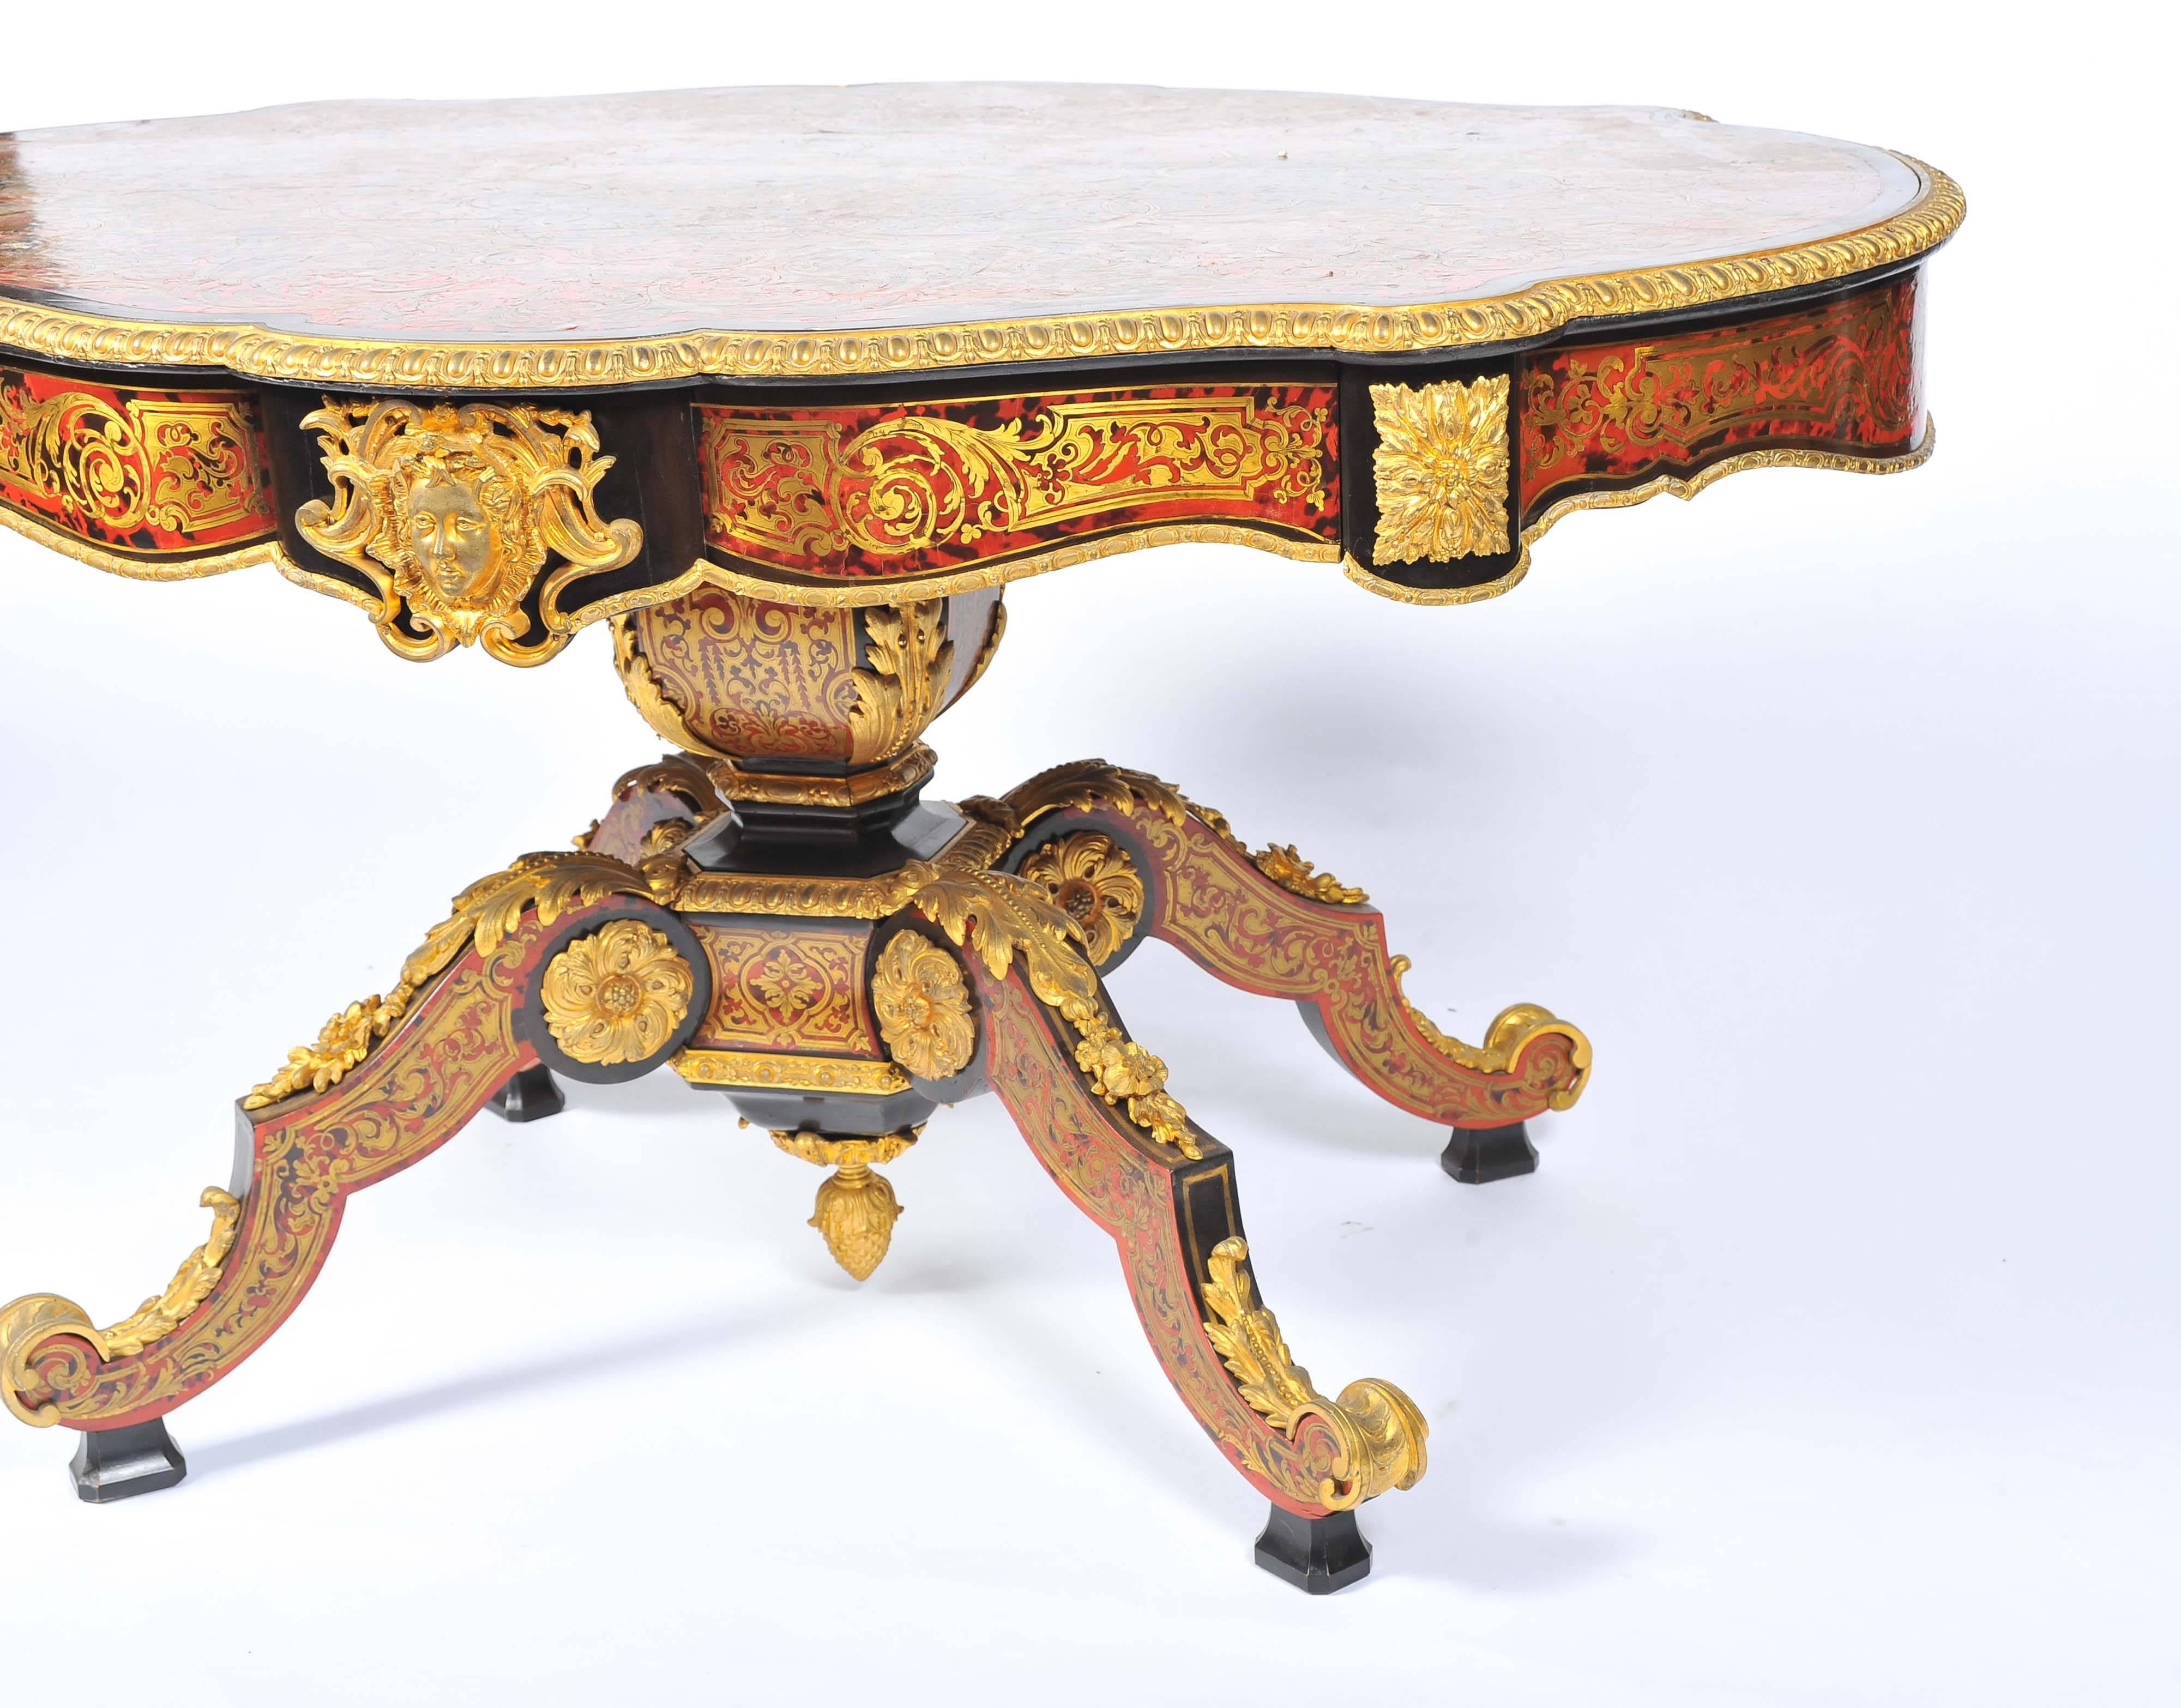 A very good quality French 19th century boulle inlaid centre table, having gilded ormolu mounts, a single frieze drawer and raised on a four splay out swept base.